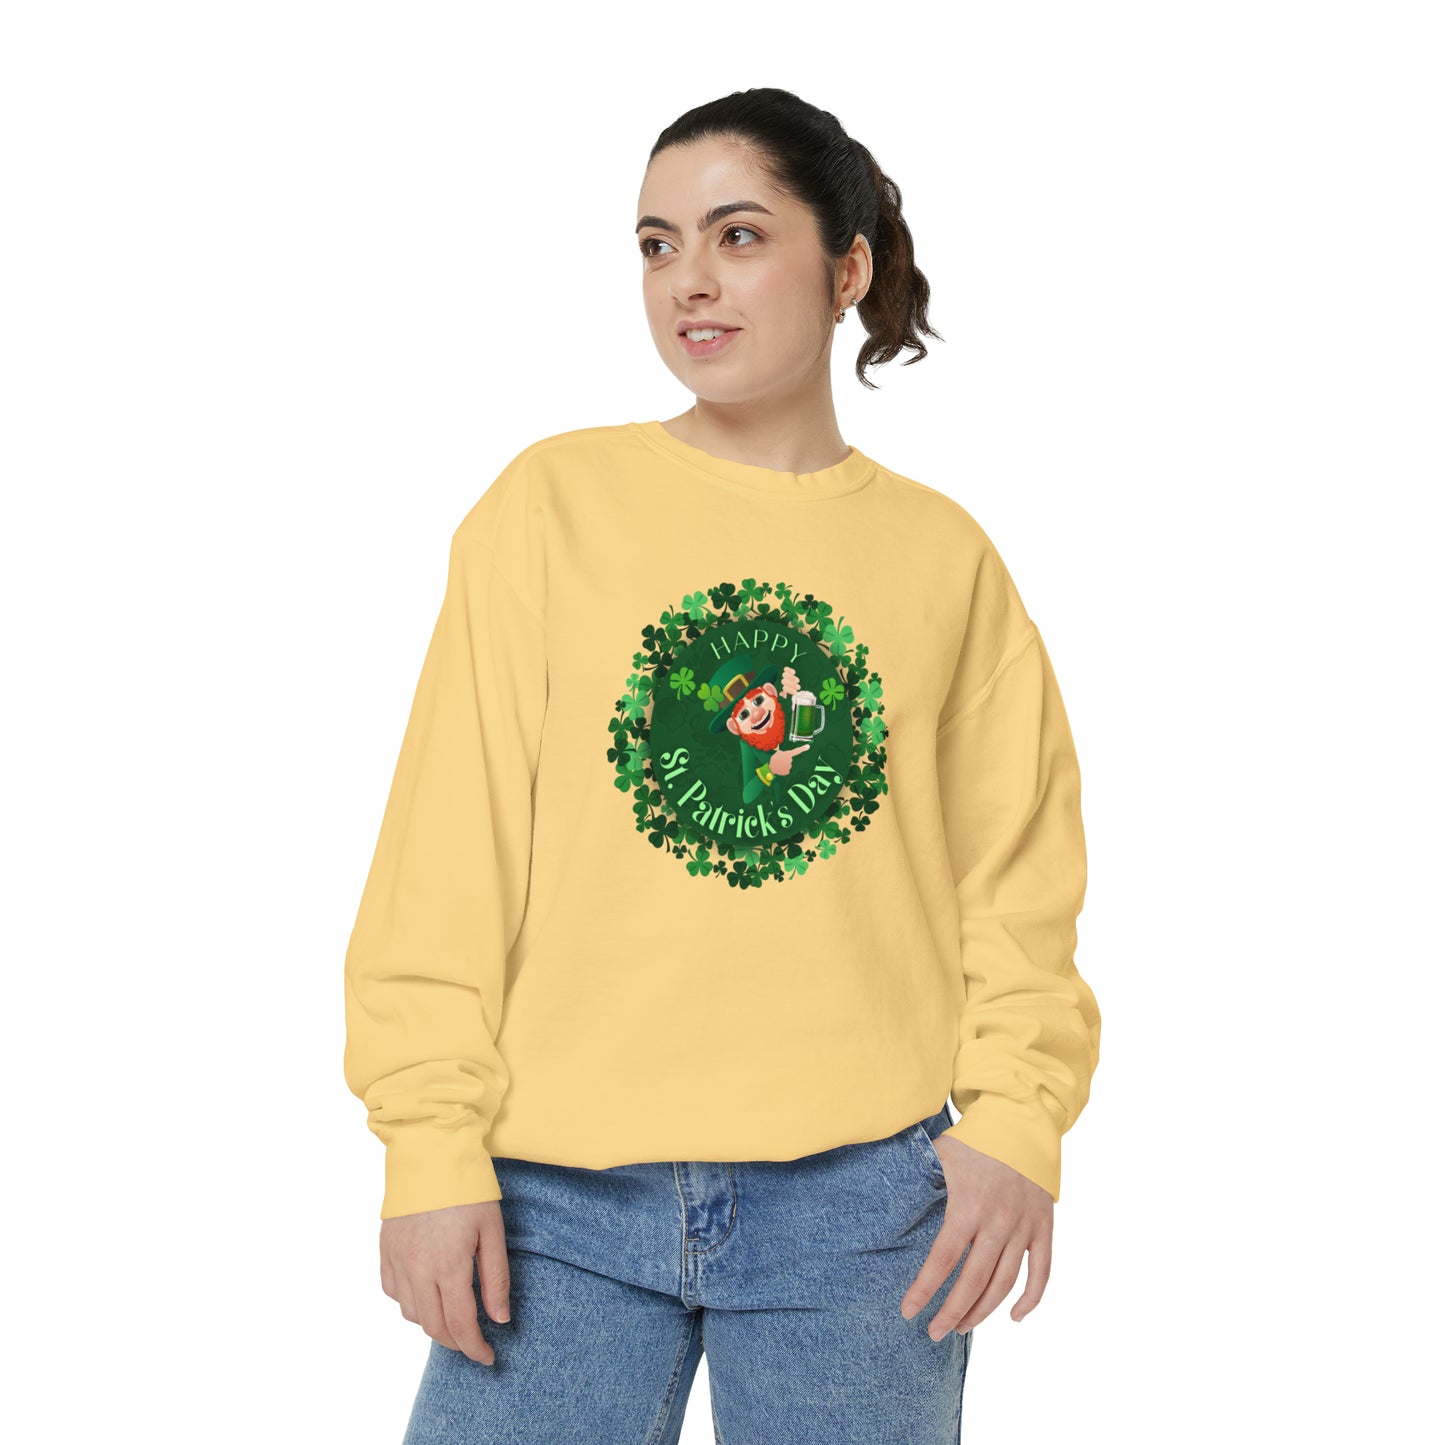 Lucky Charms St. Patrick's Day Unisex Sweatshirt